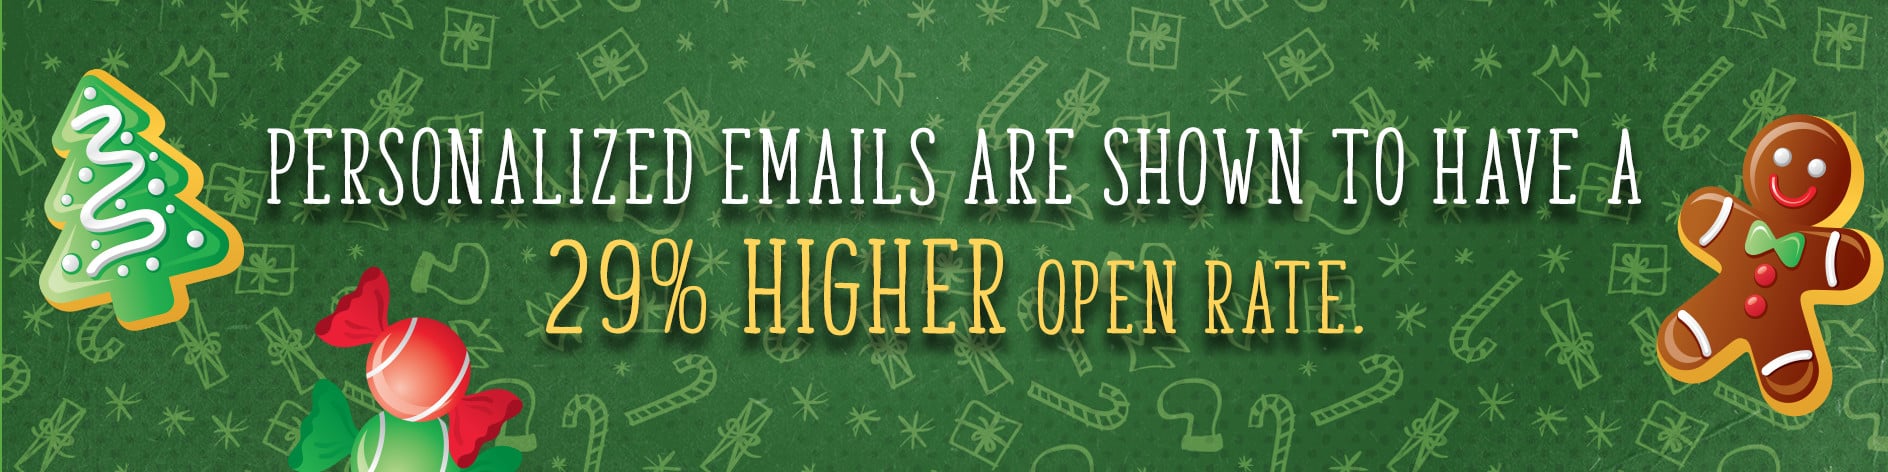 Personalization Email Open Rate 